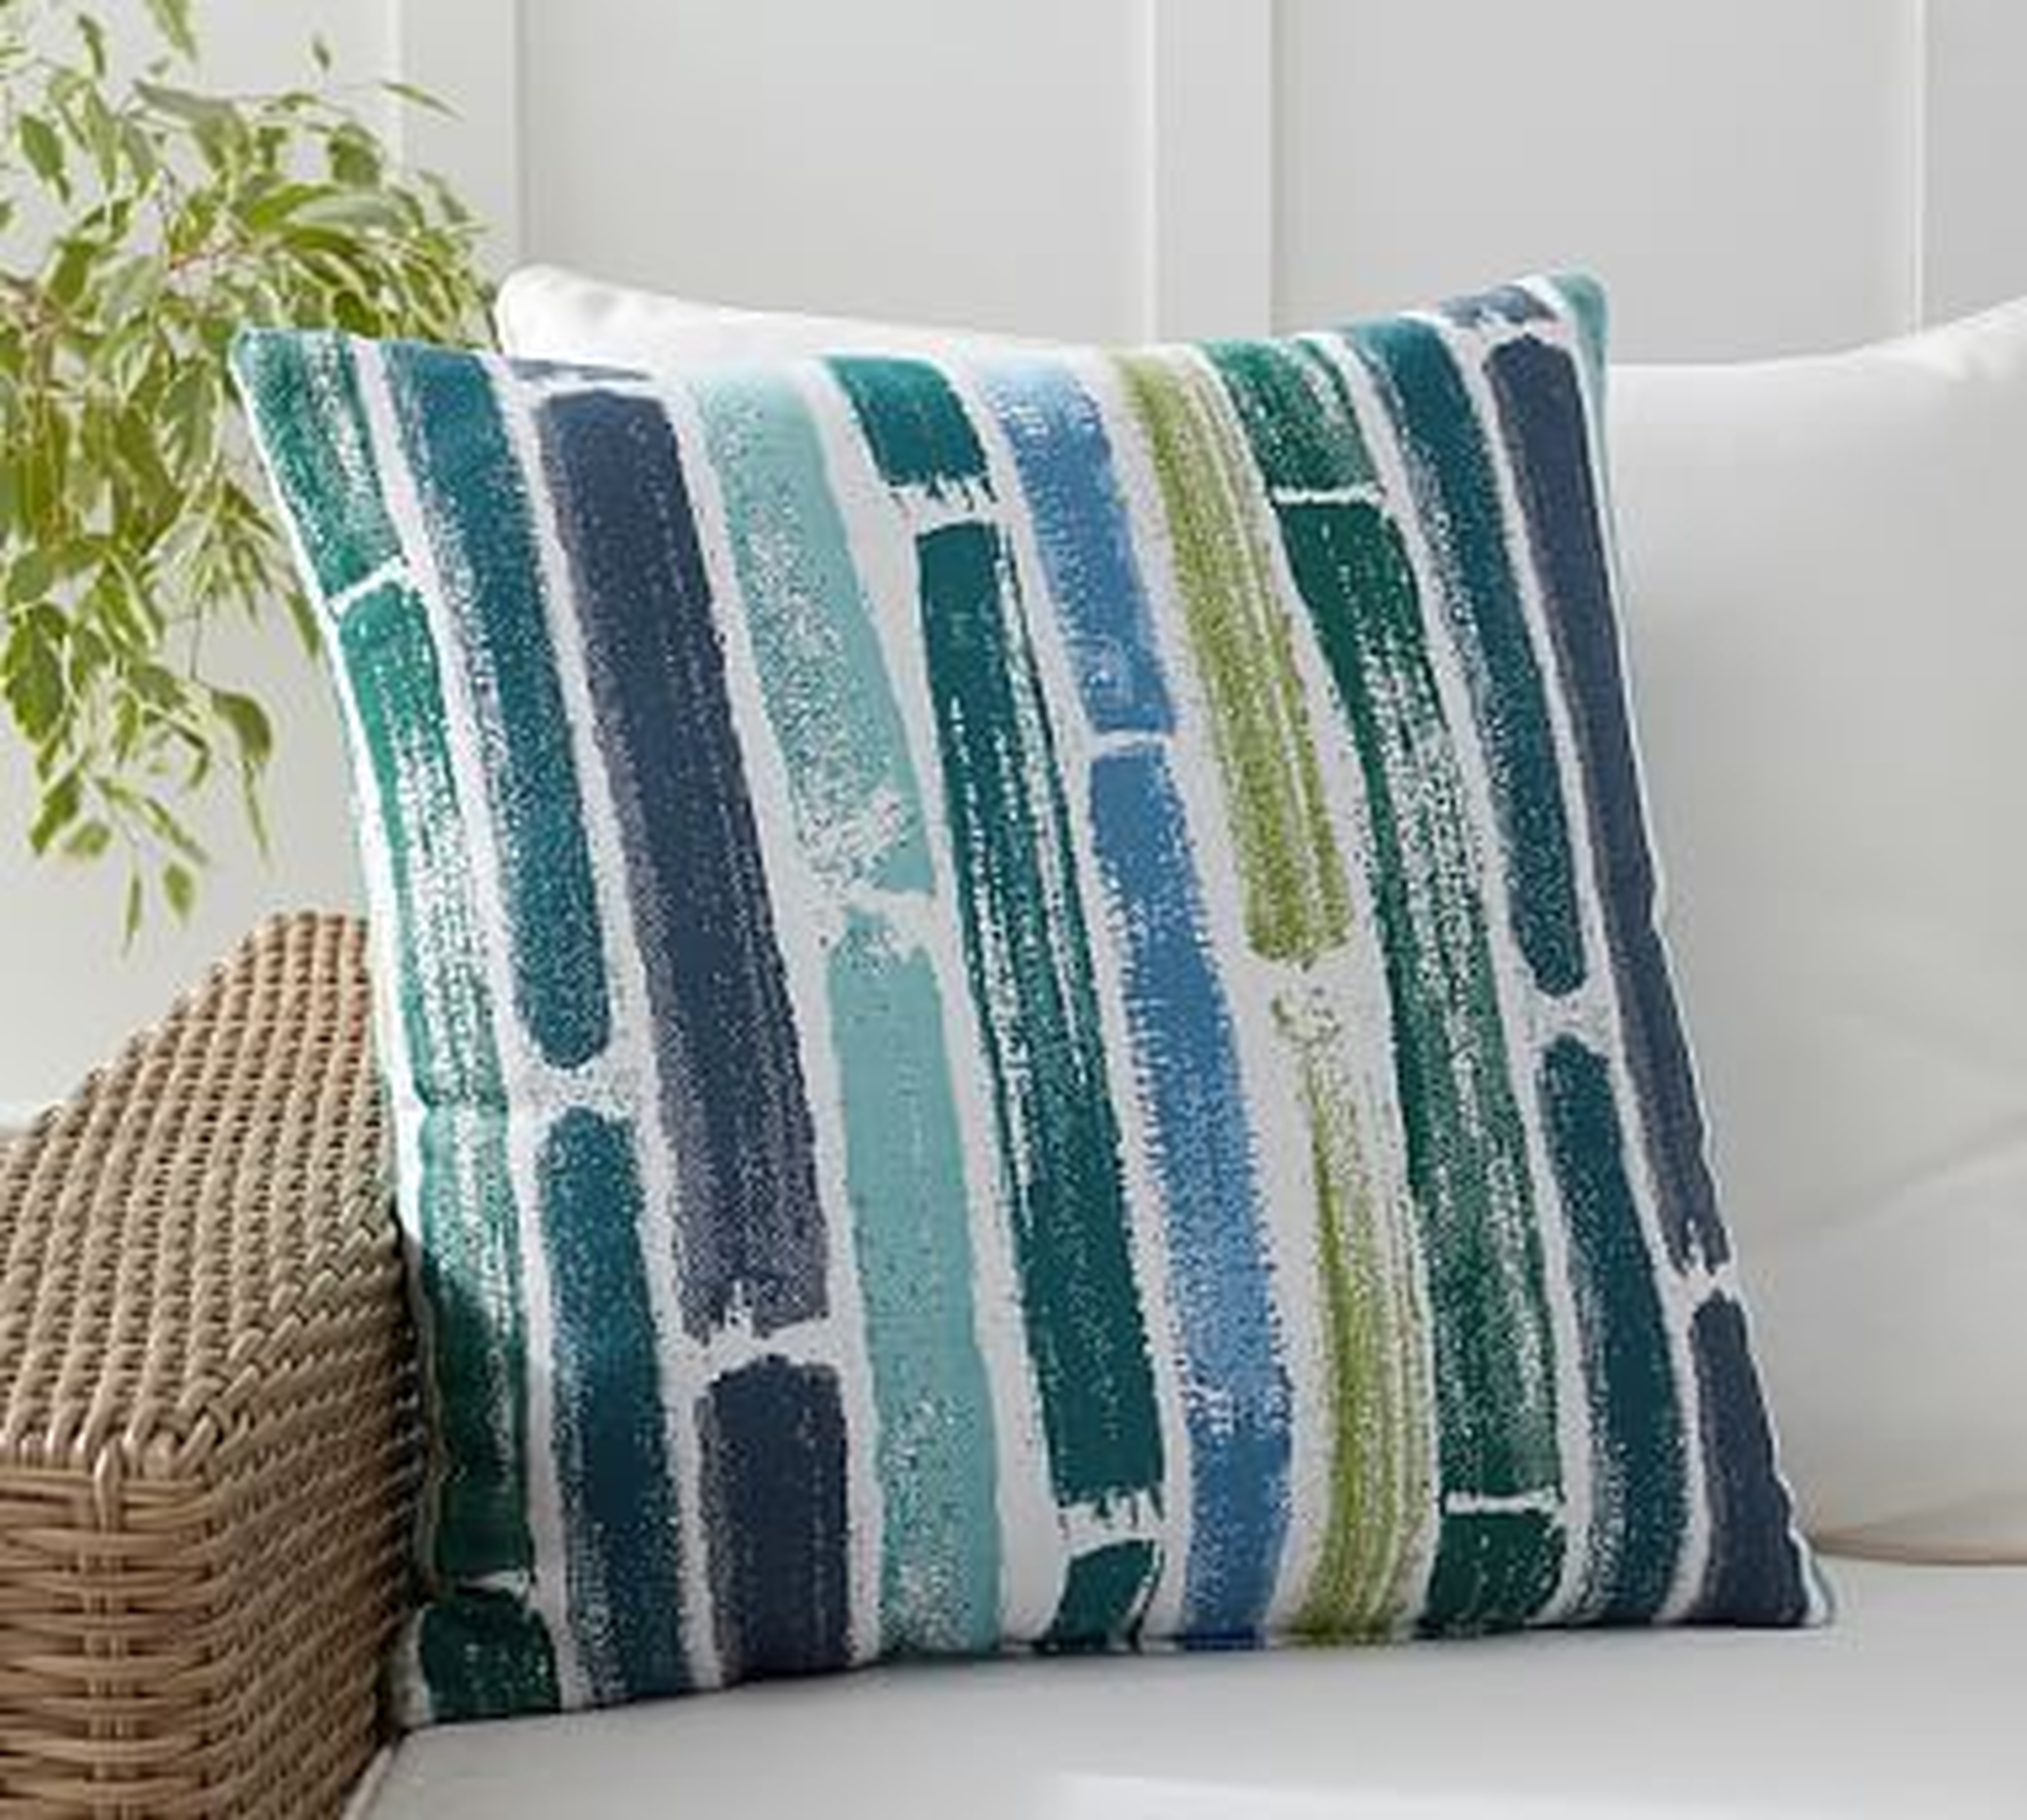 Sunbrella(R) Painted Striped Indoor/Outdoor Pillow, 22" x 22", Multi - Pottery Barn